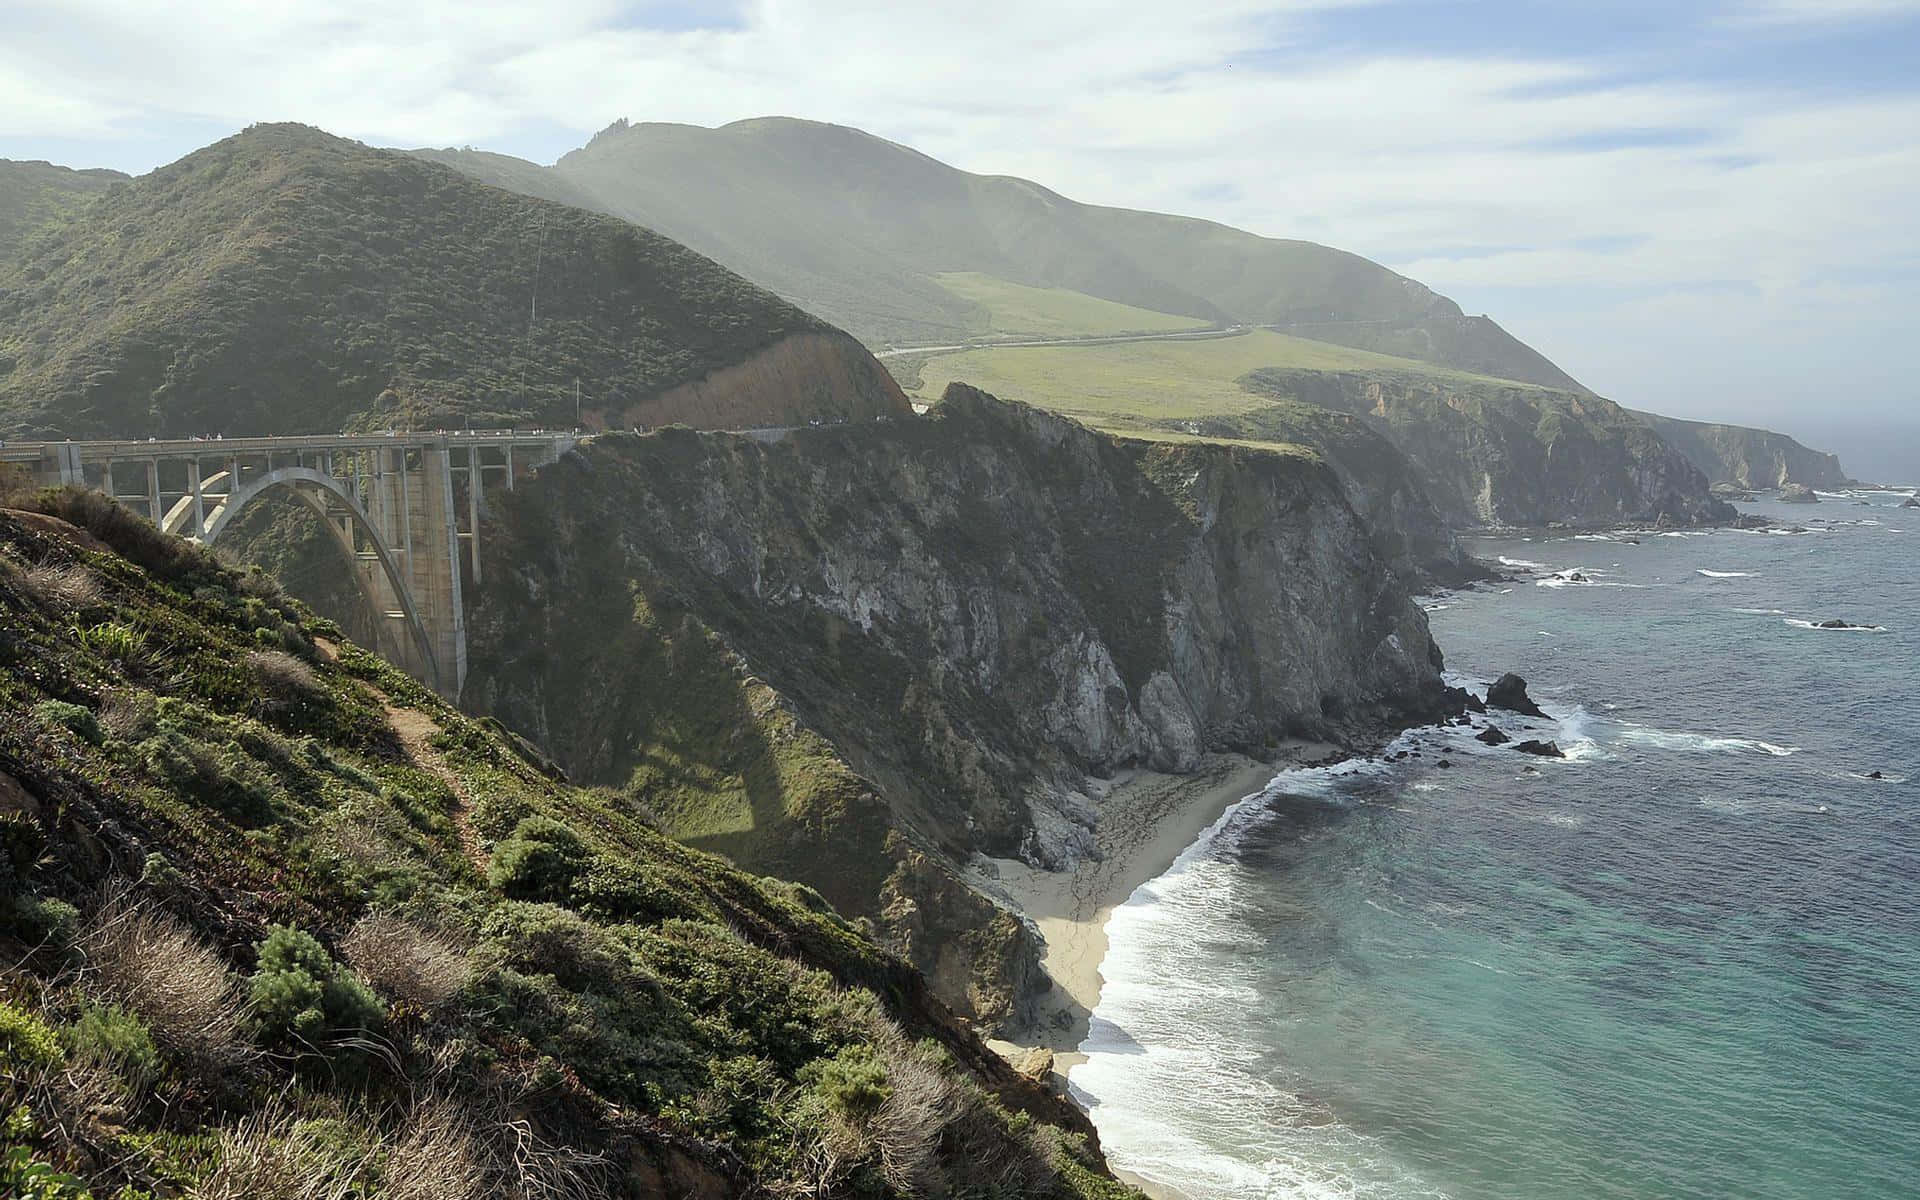 A breathtaking view of Big Sur